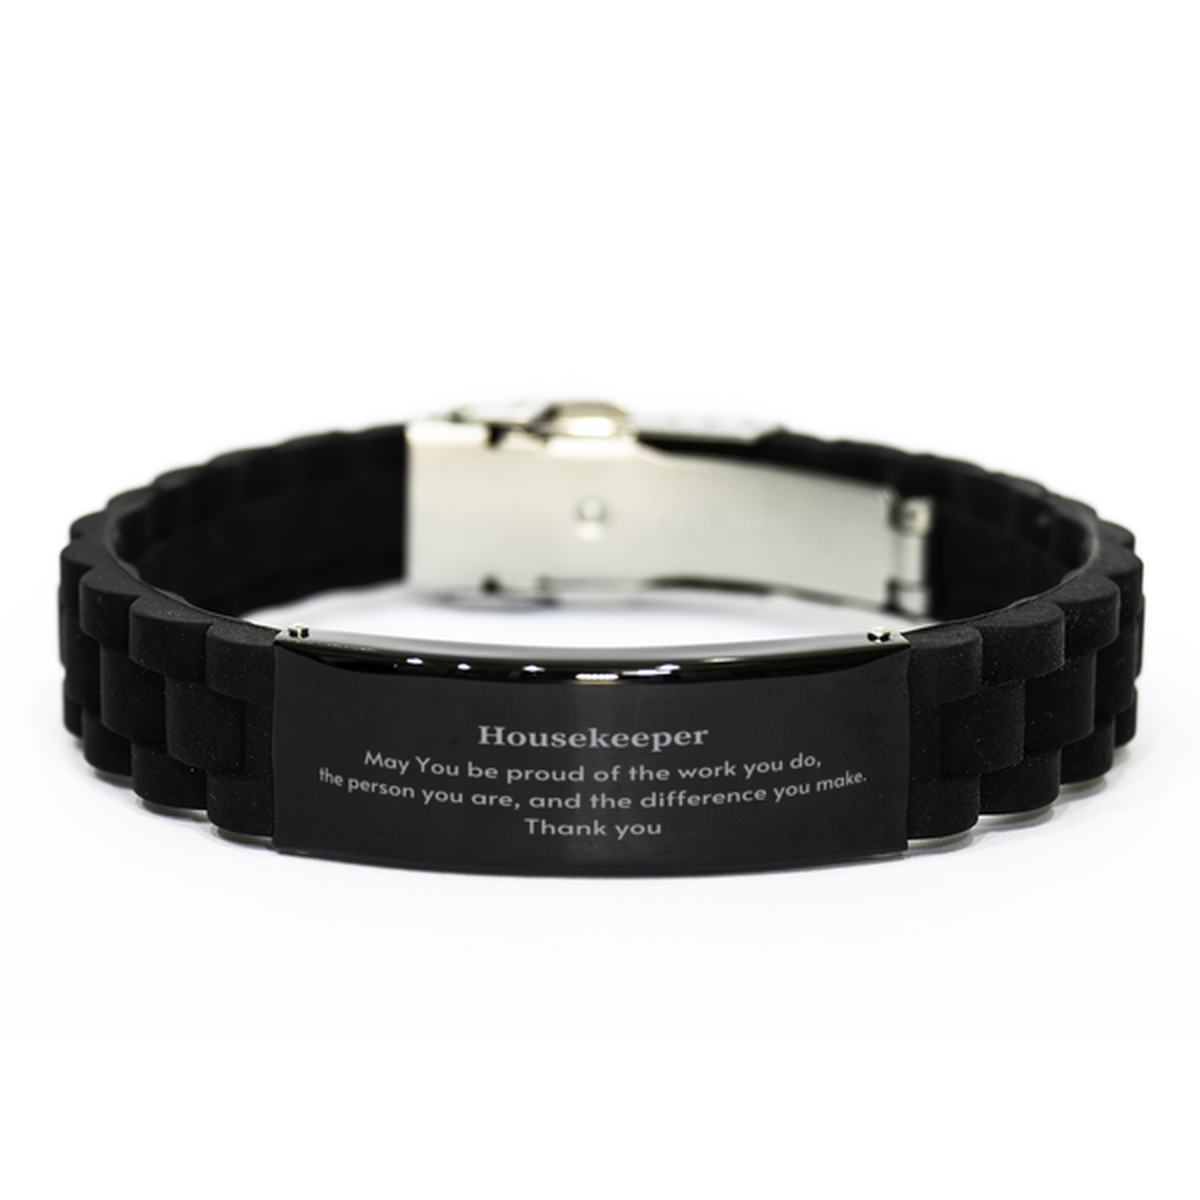 Heartwarming Black Glidelock Clasp Bracelet Retirement Coworkers Gifts for Housekeeper, Housekeeper May You be proud of the work you do, the person you are Gifts for Boss Men Women Friends